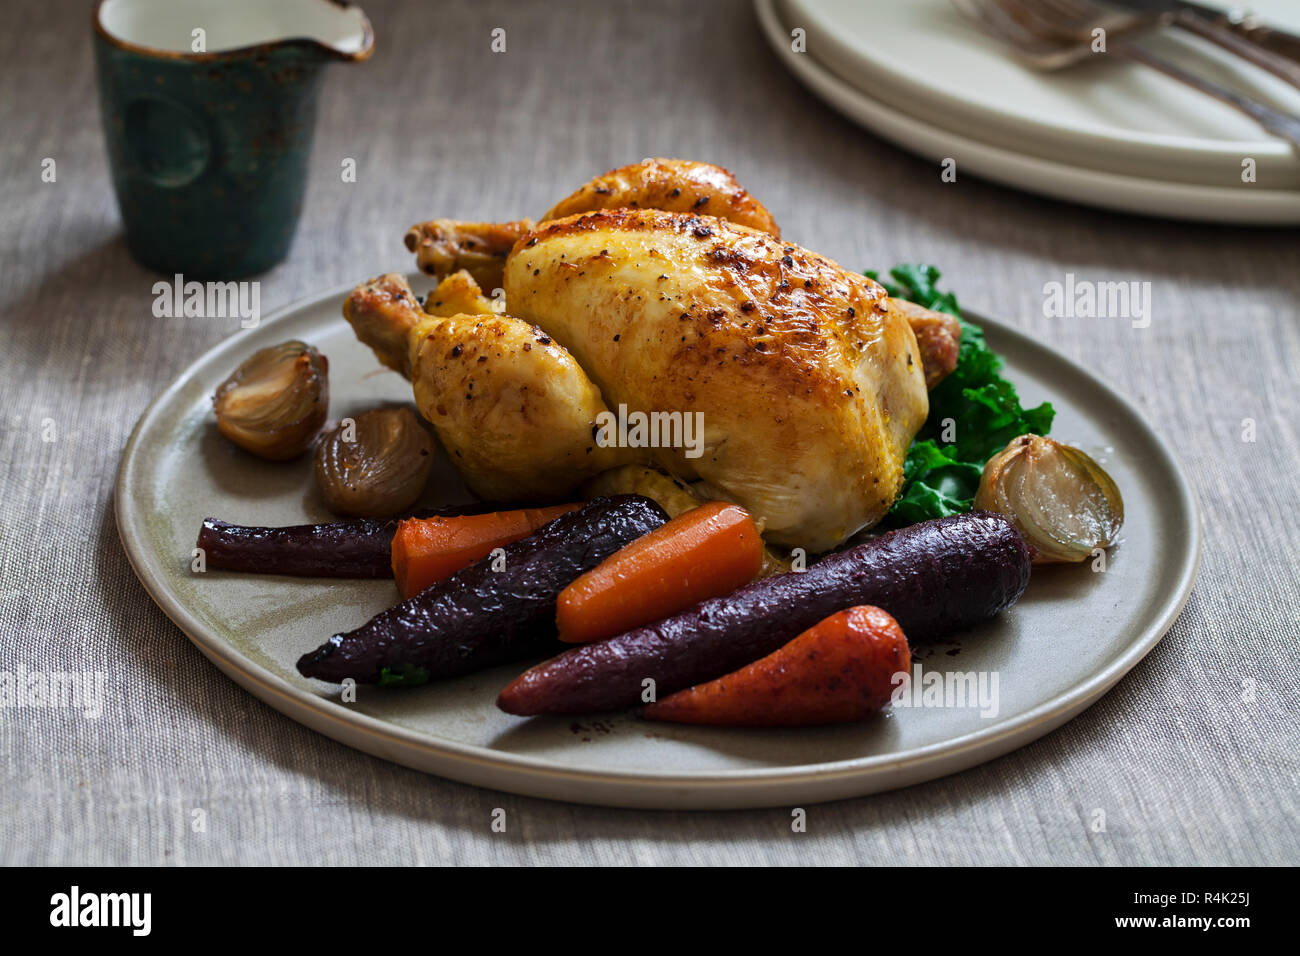 Whole roast poussin with purple and red carrot, kale, braised shallots and gravy Stock Photo